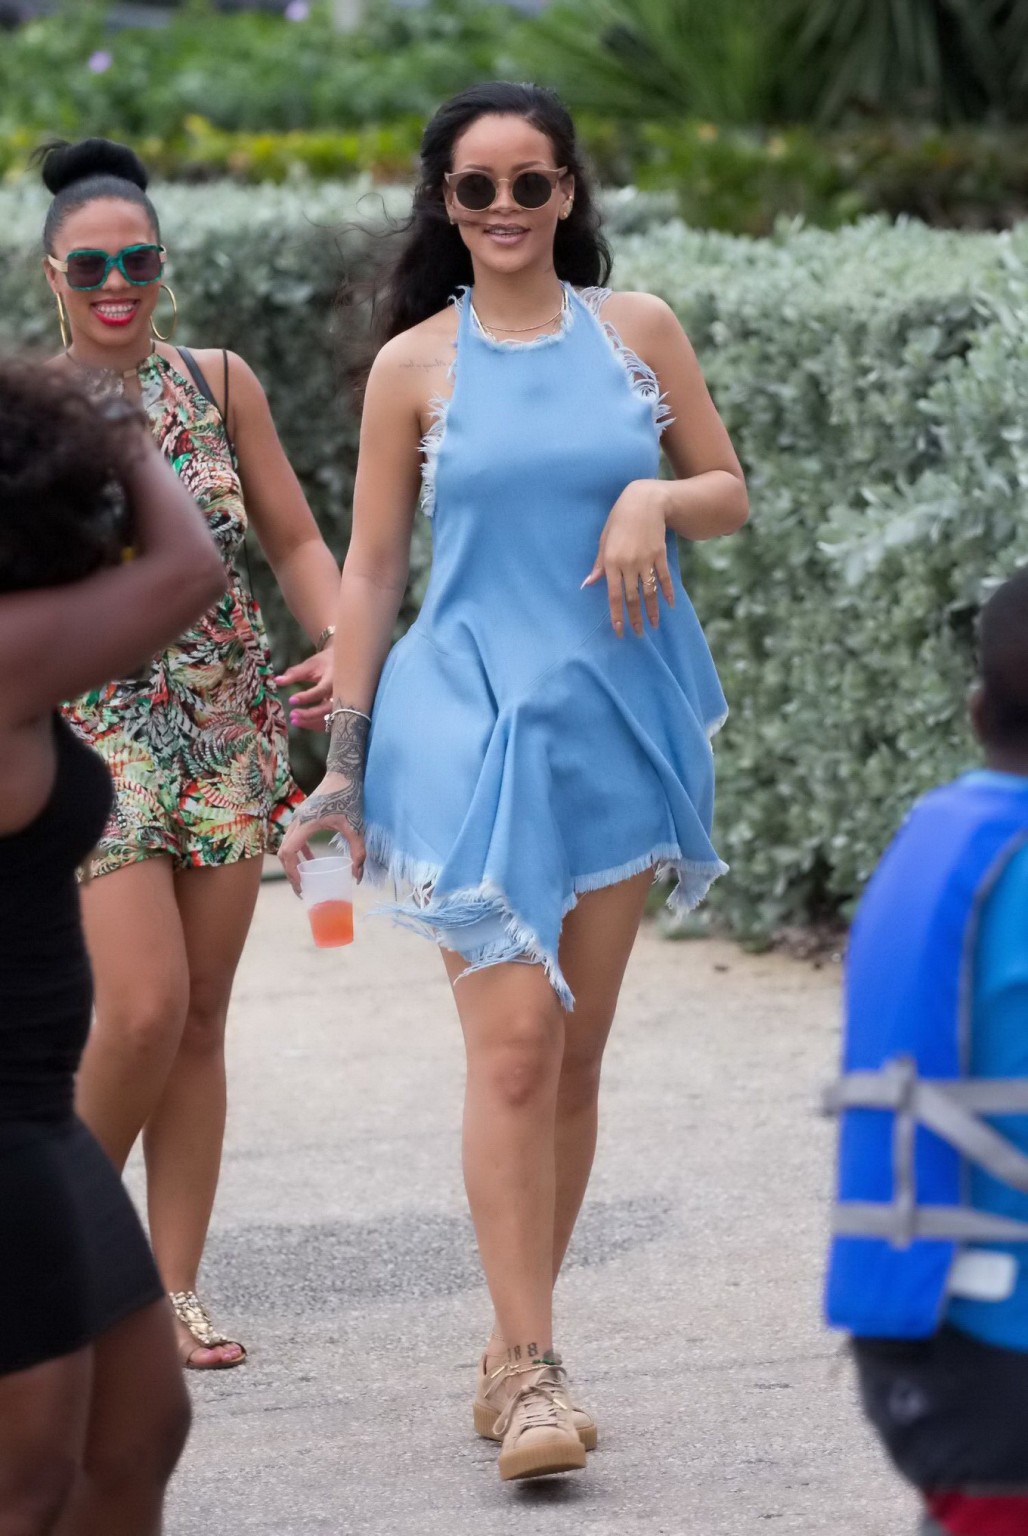 Rihanna showing sideboob and pokies in tiny blue dress #75148452